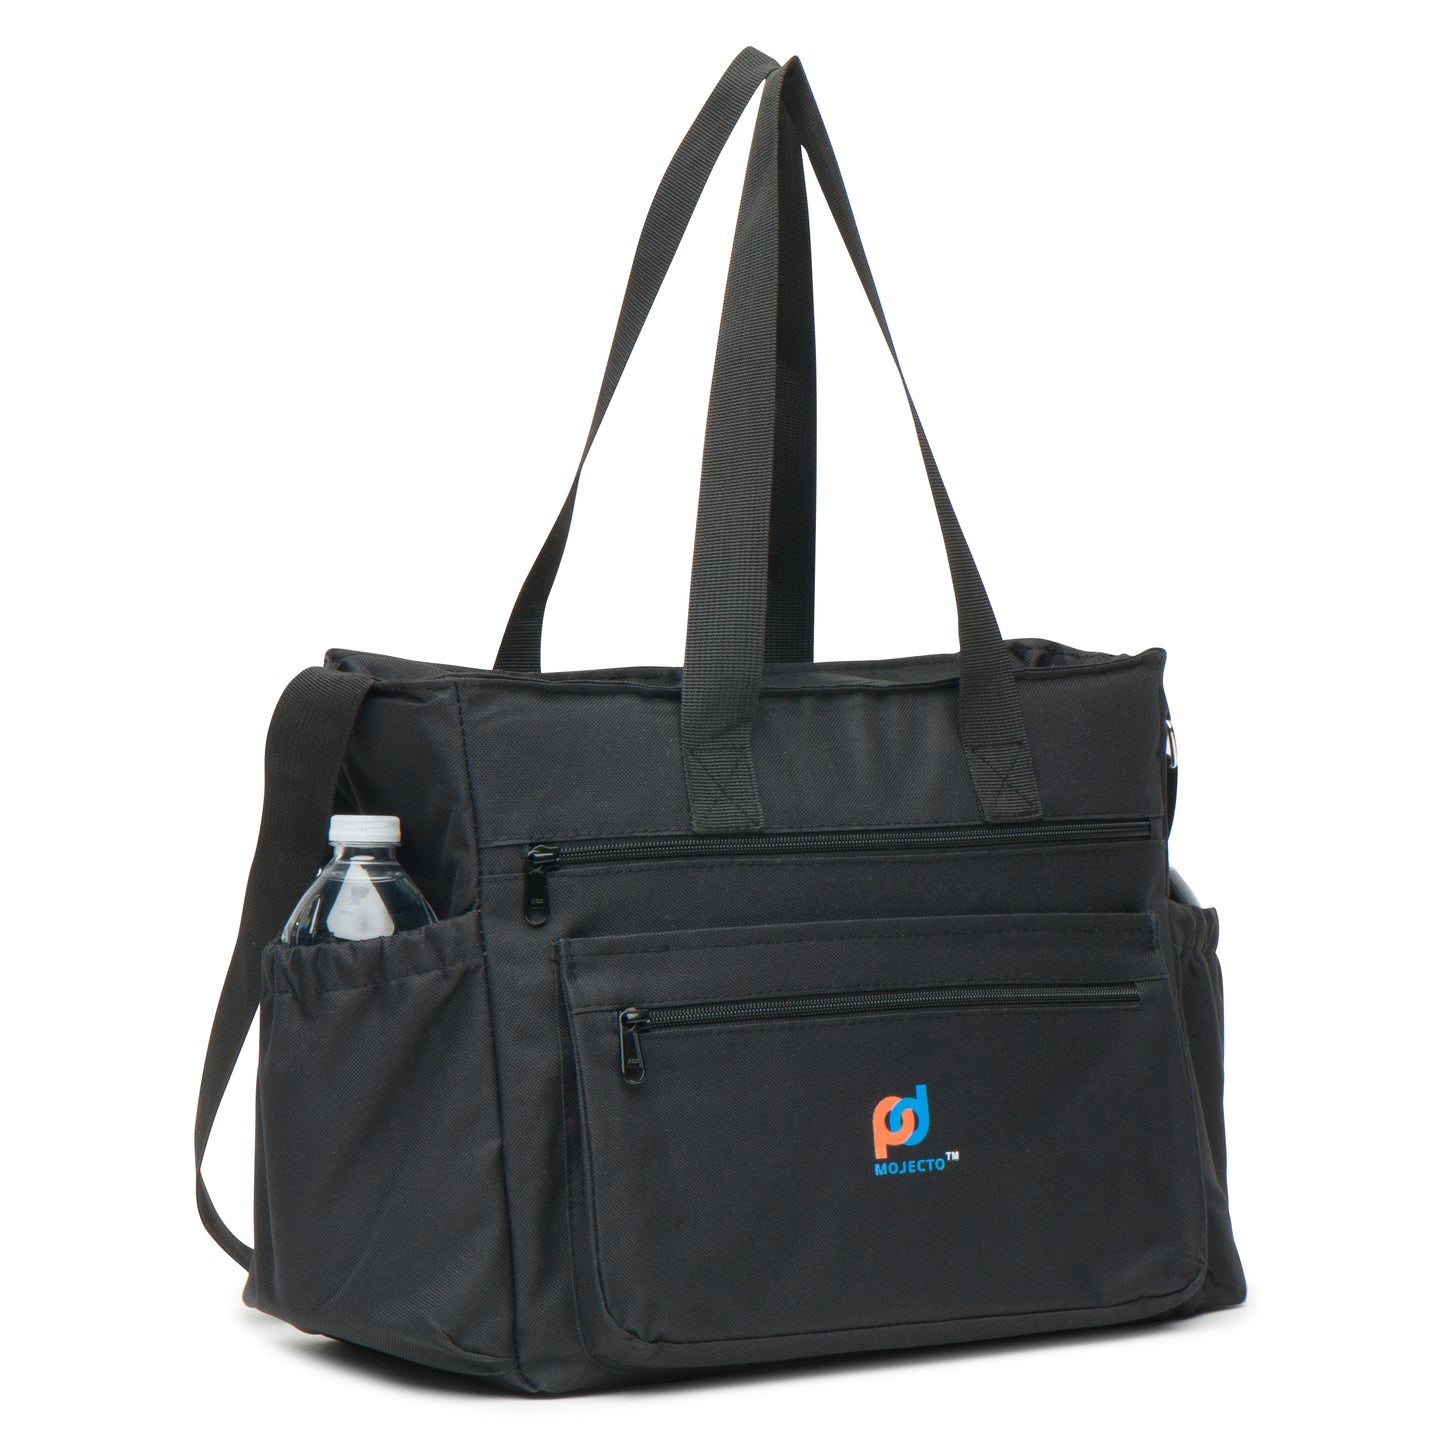 Extra Large Lunch Bag with 6 External Pockets (13.5x10.5x7 Inches).